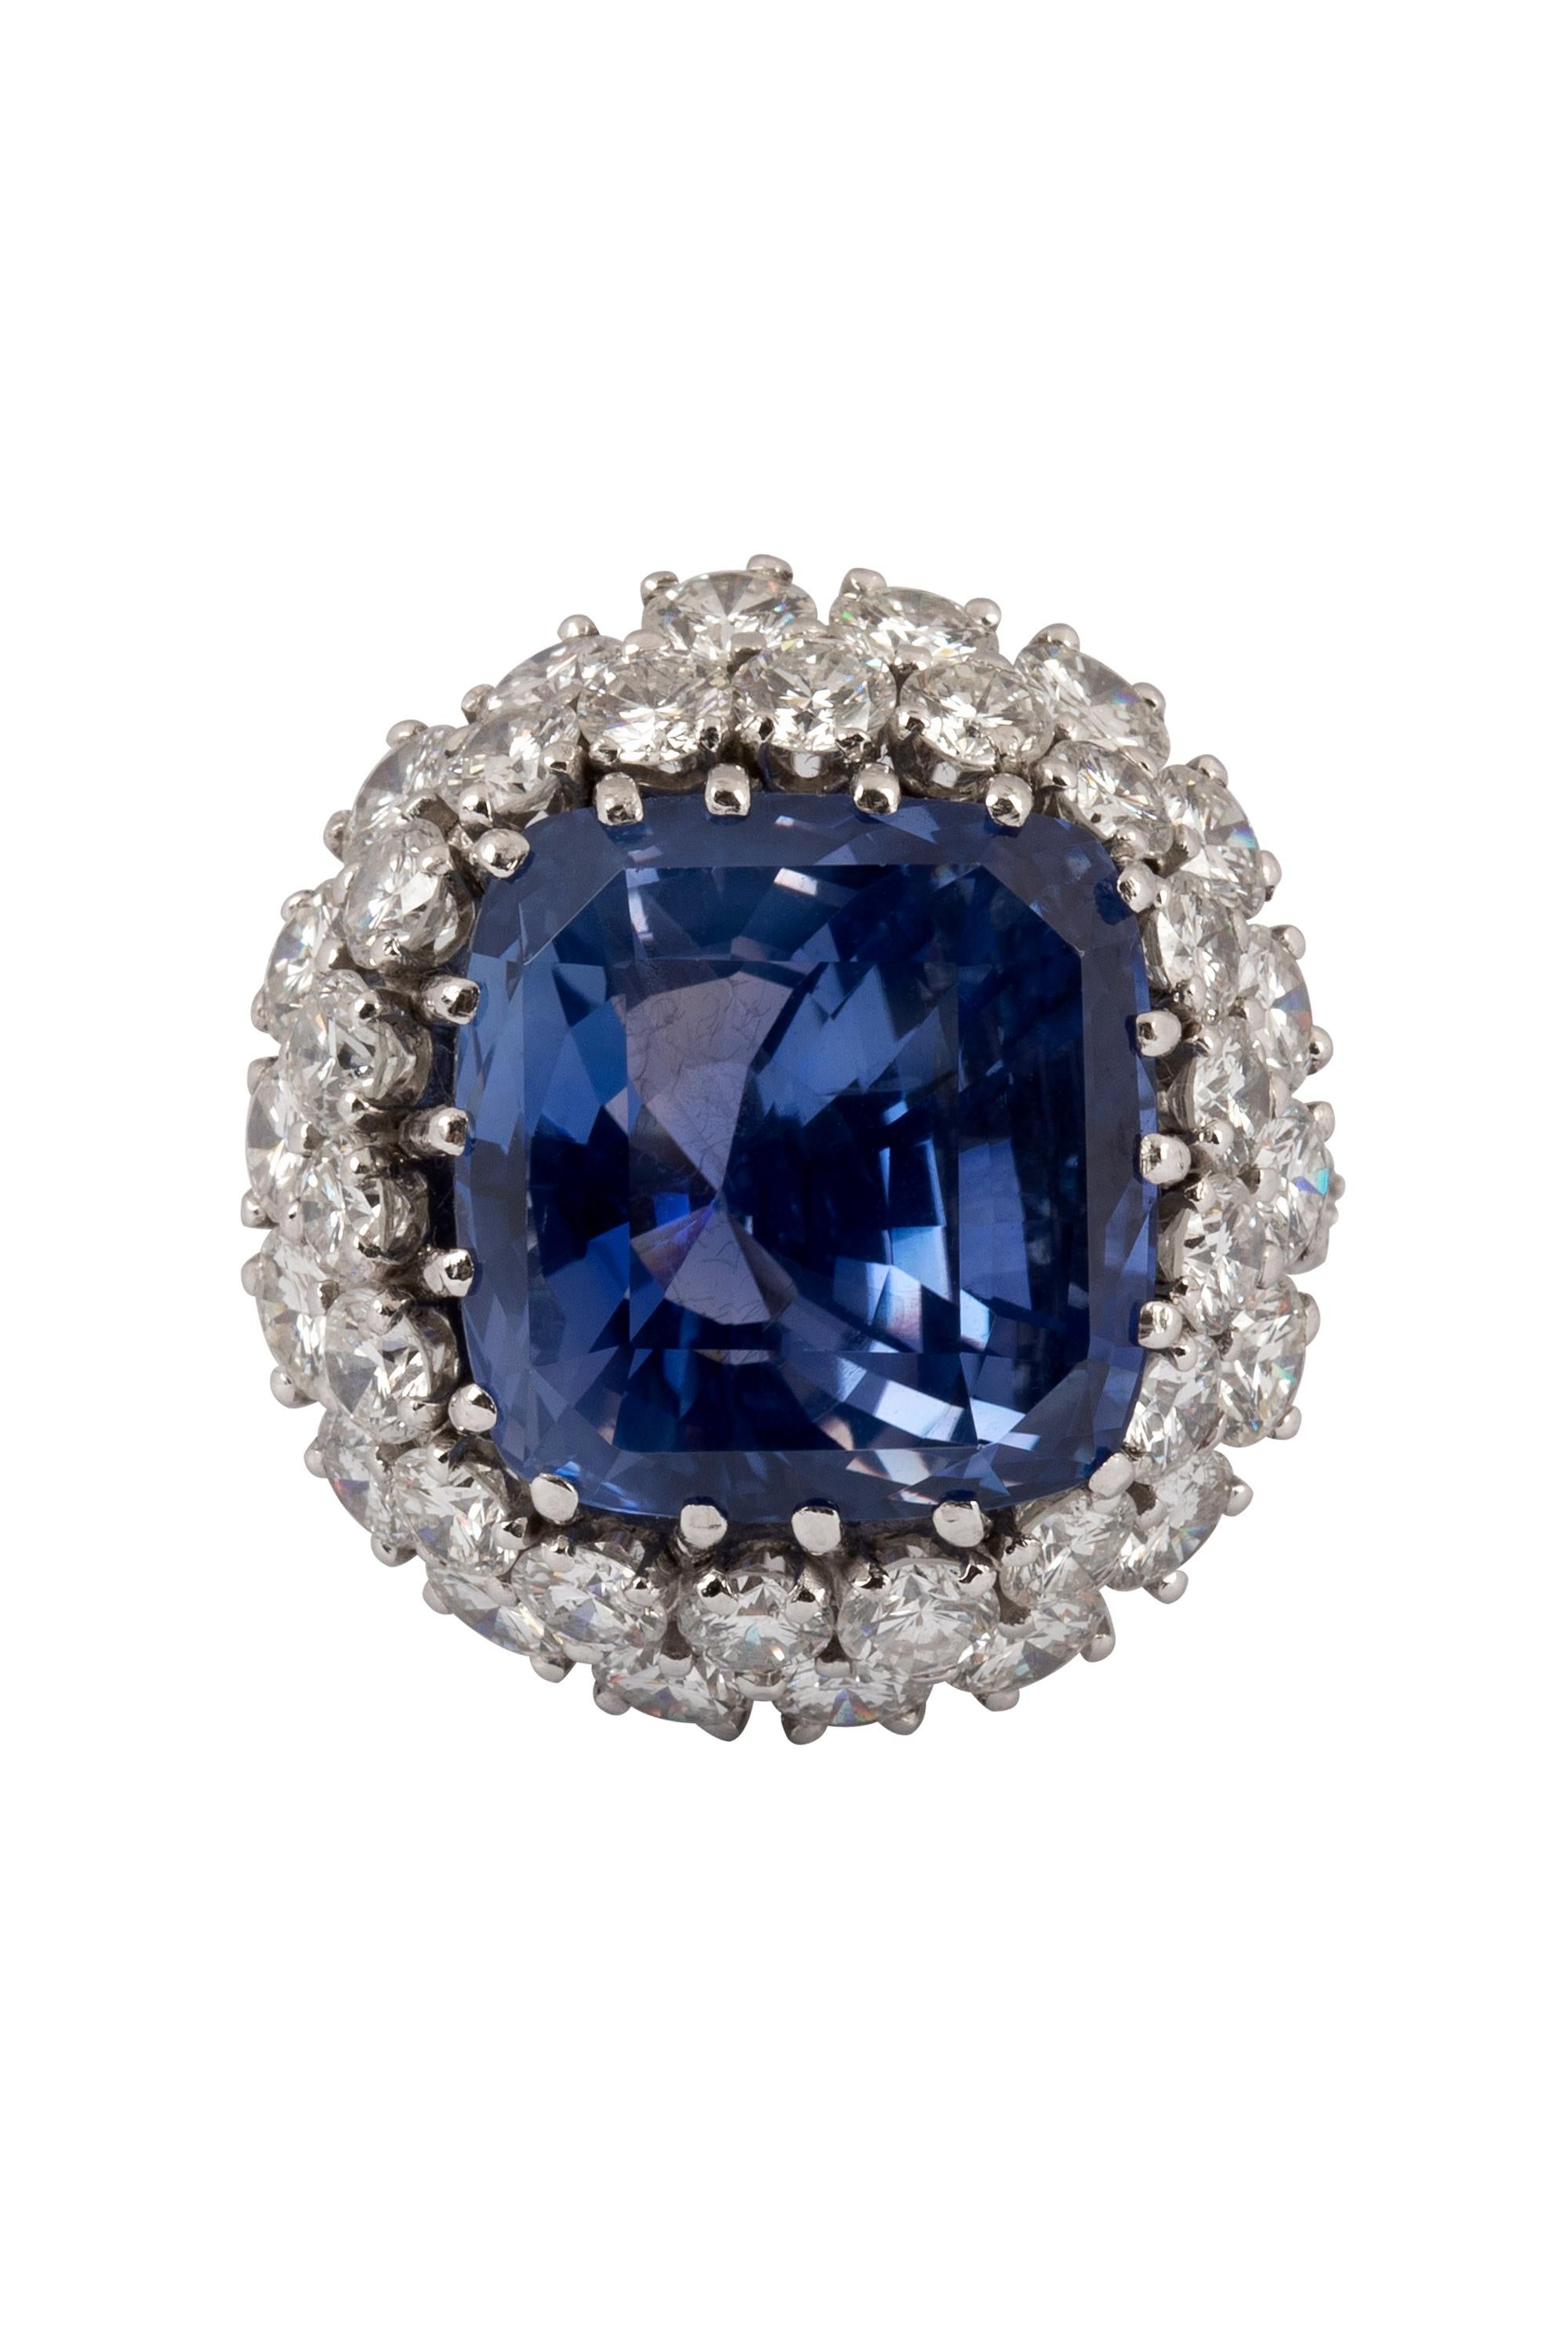 An exceptionally rare 24.18 carat color change cushion cut sapphire radiates from the center of this luxurious and lavish ring. Shifting from a striking bluish violet in daylight to a rich purple in incandescent light, the sapphire is artfully